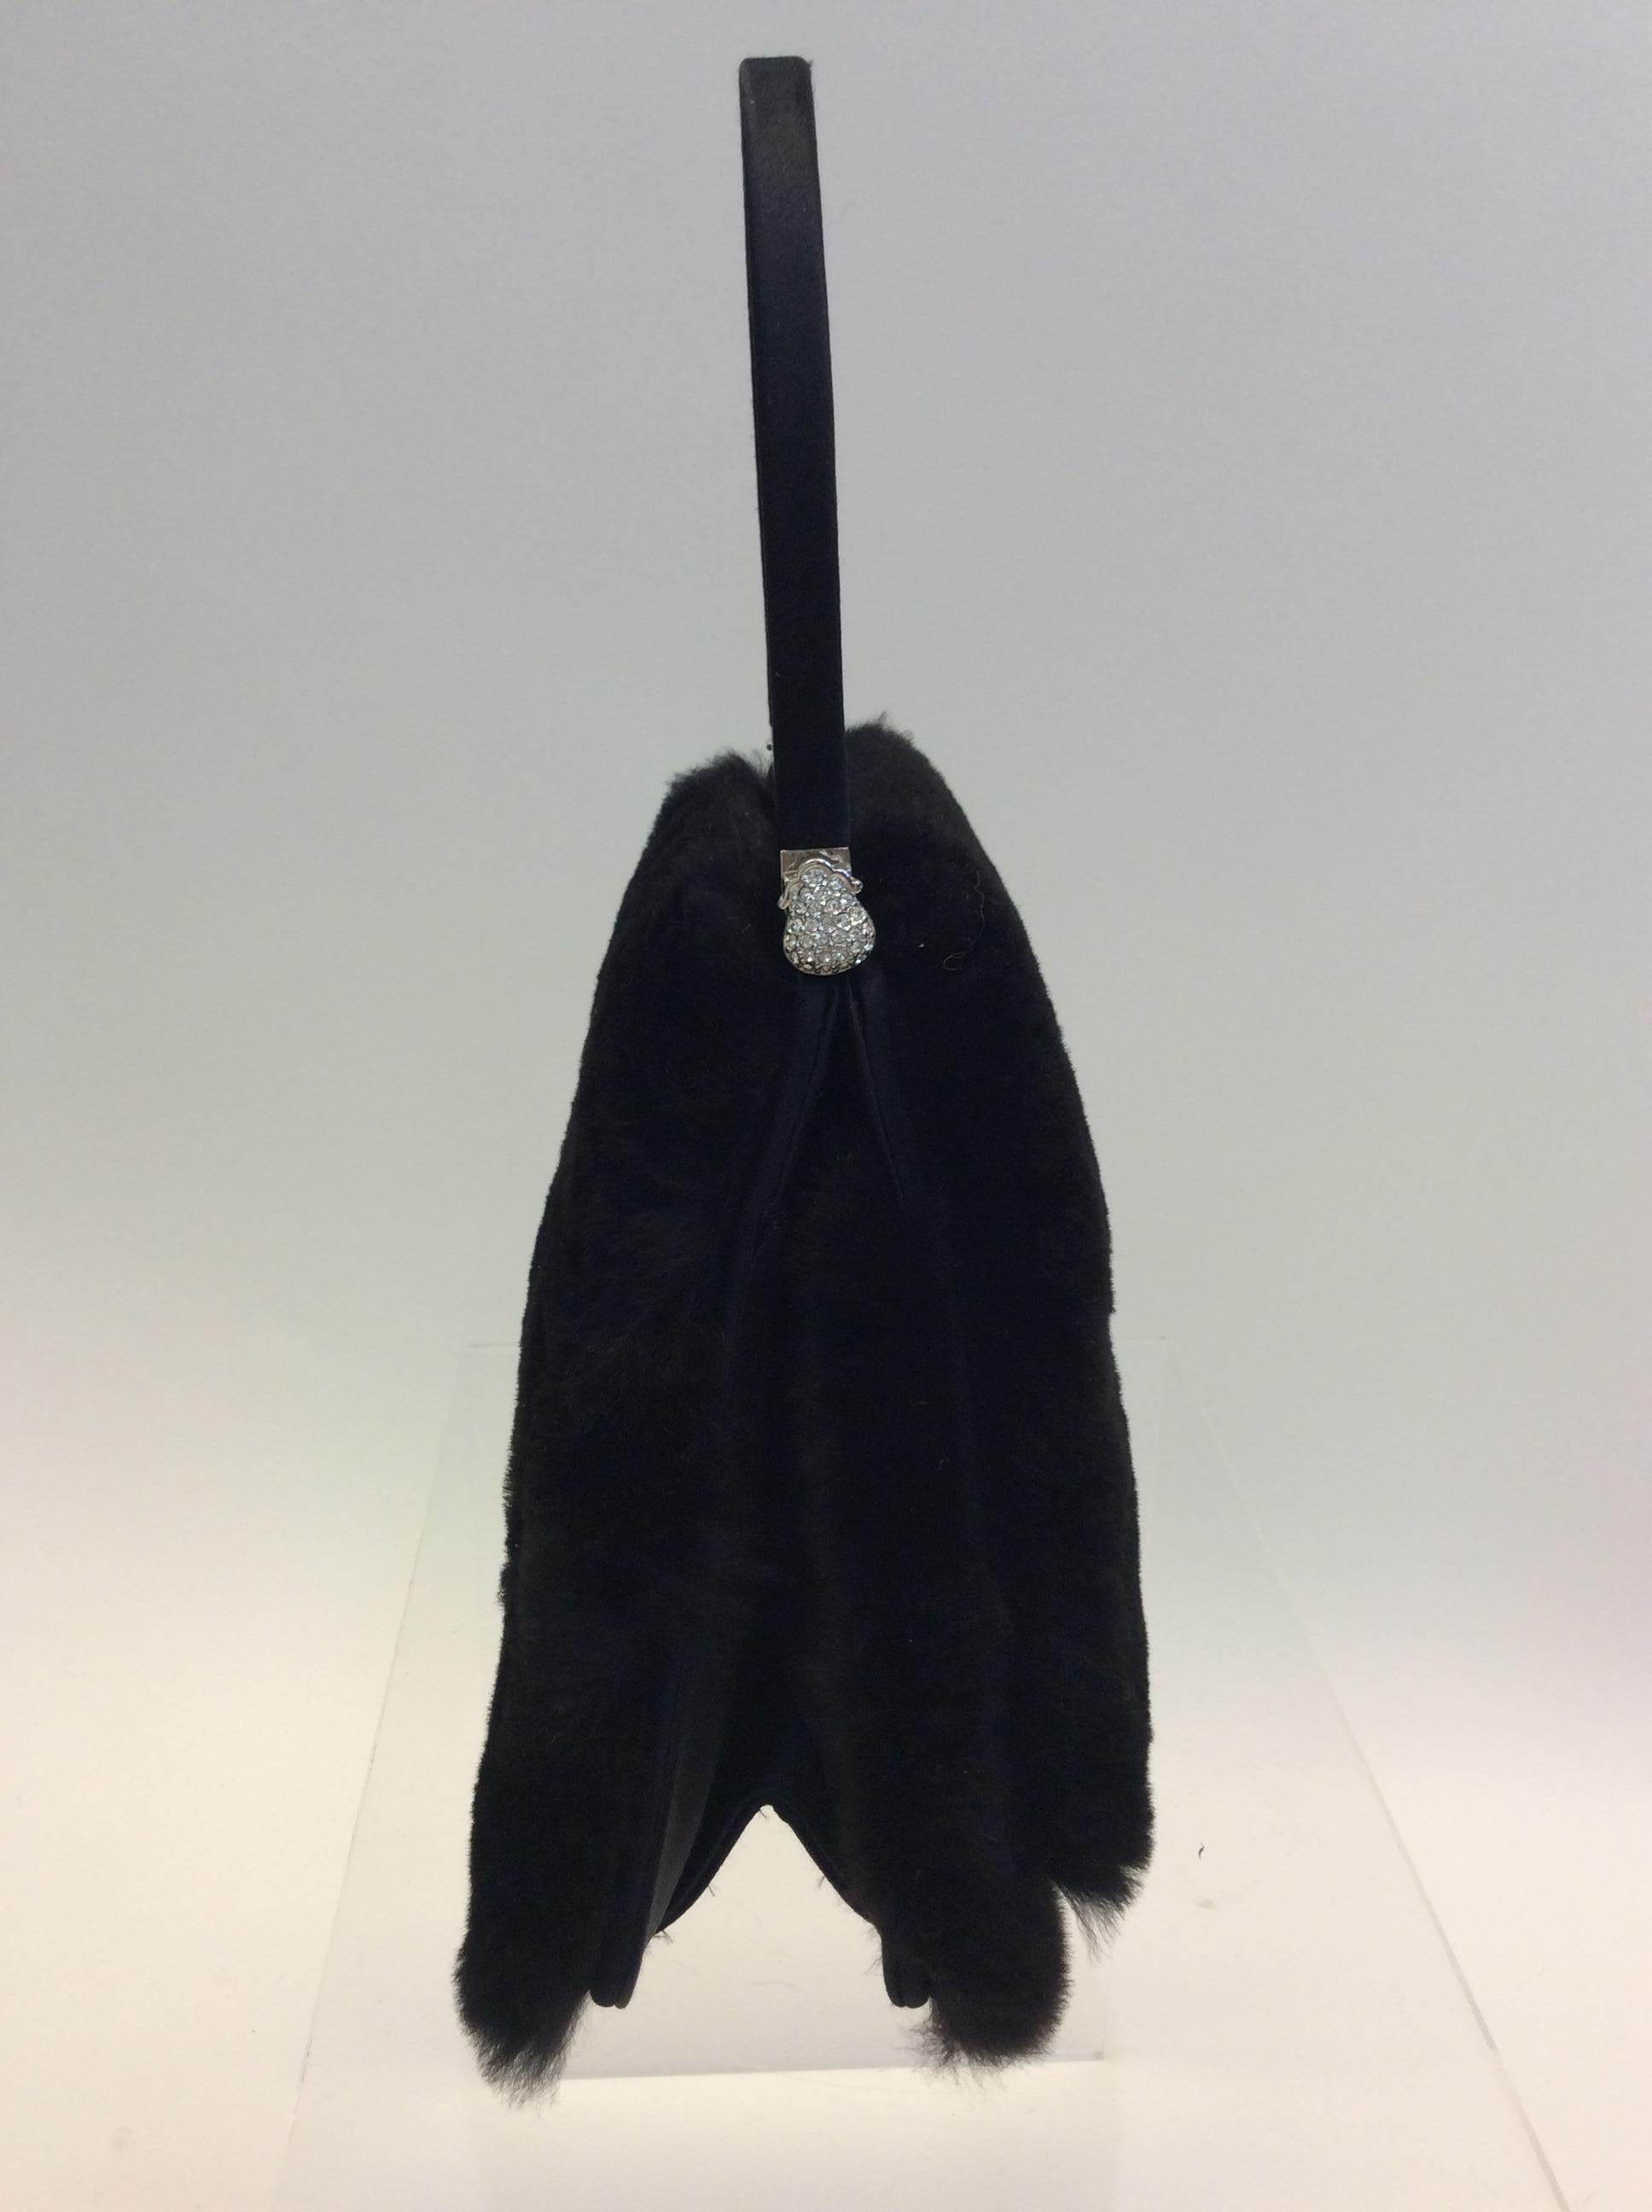 Judith Leiber Black Mink Handbag In Excellent Condition For Sale In Narberth, PA